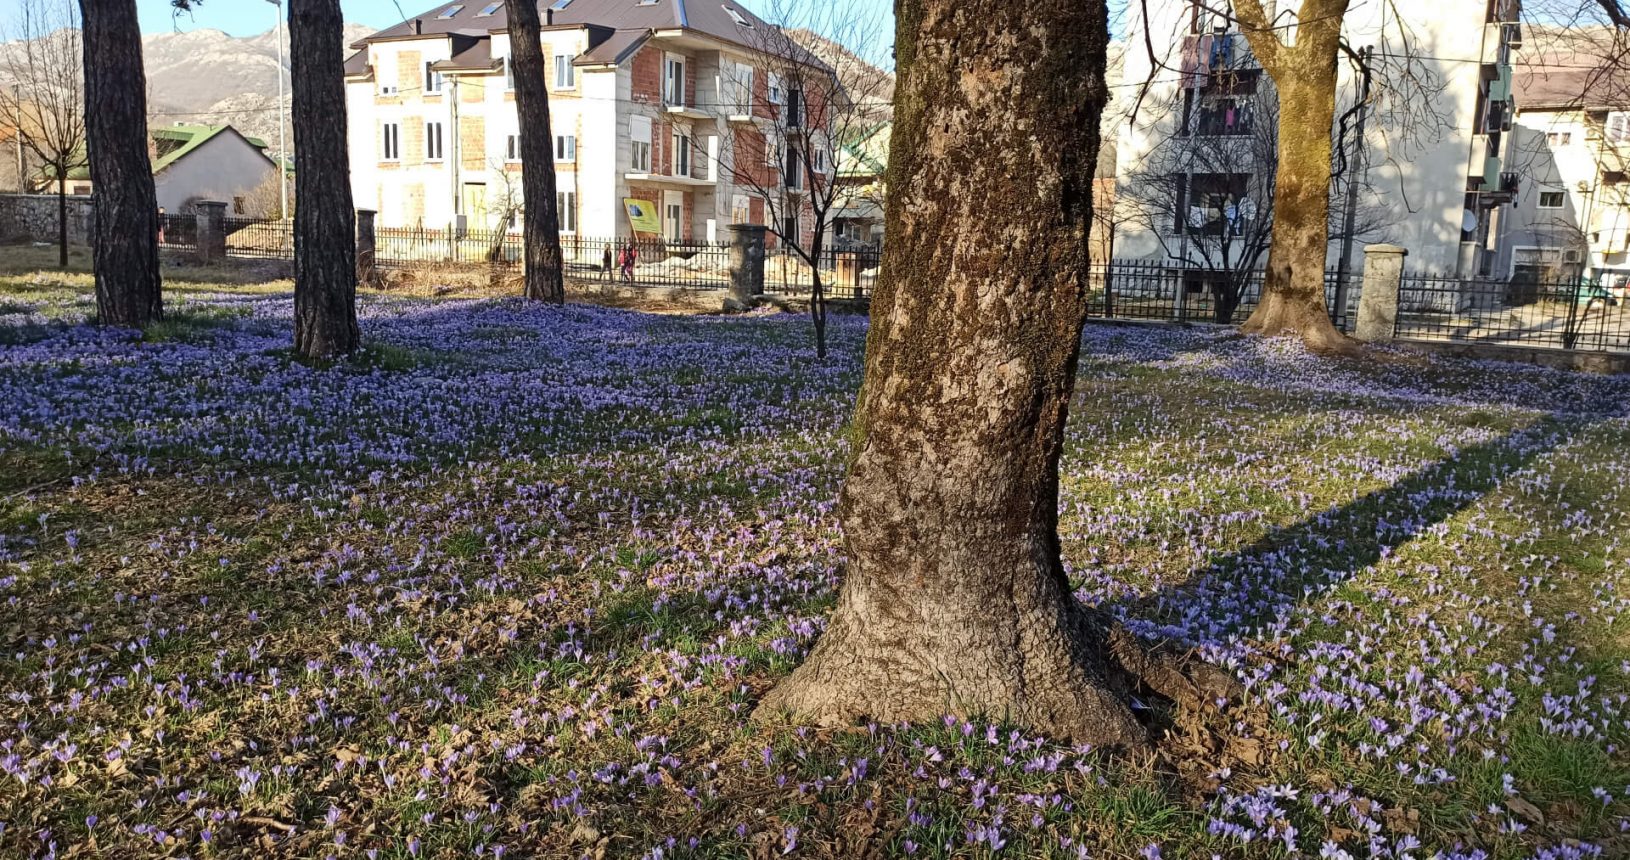 Crocuses and late winter flowers in the park